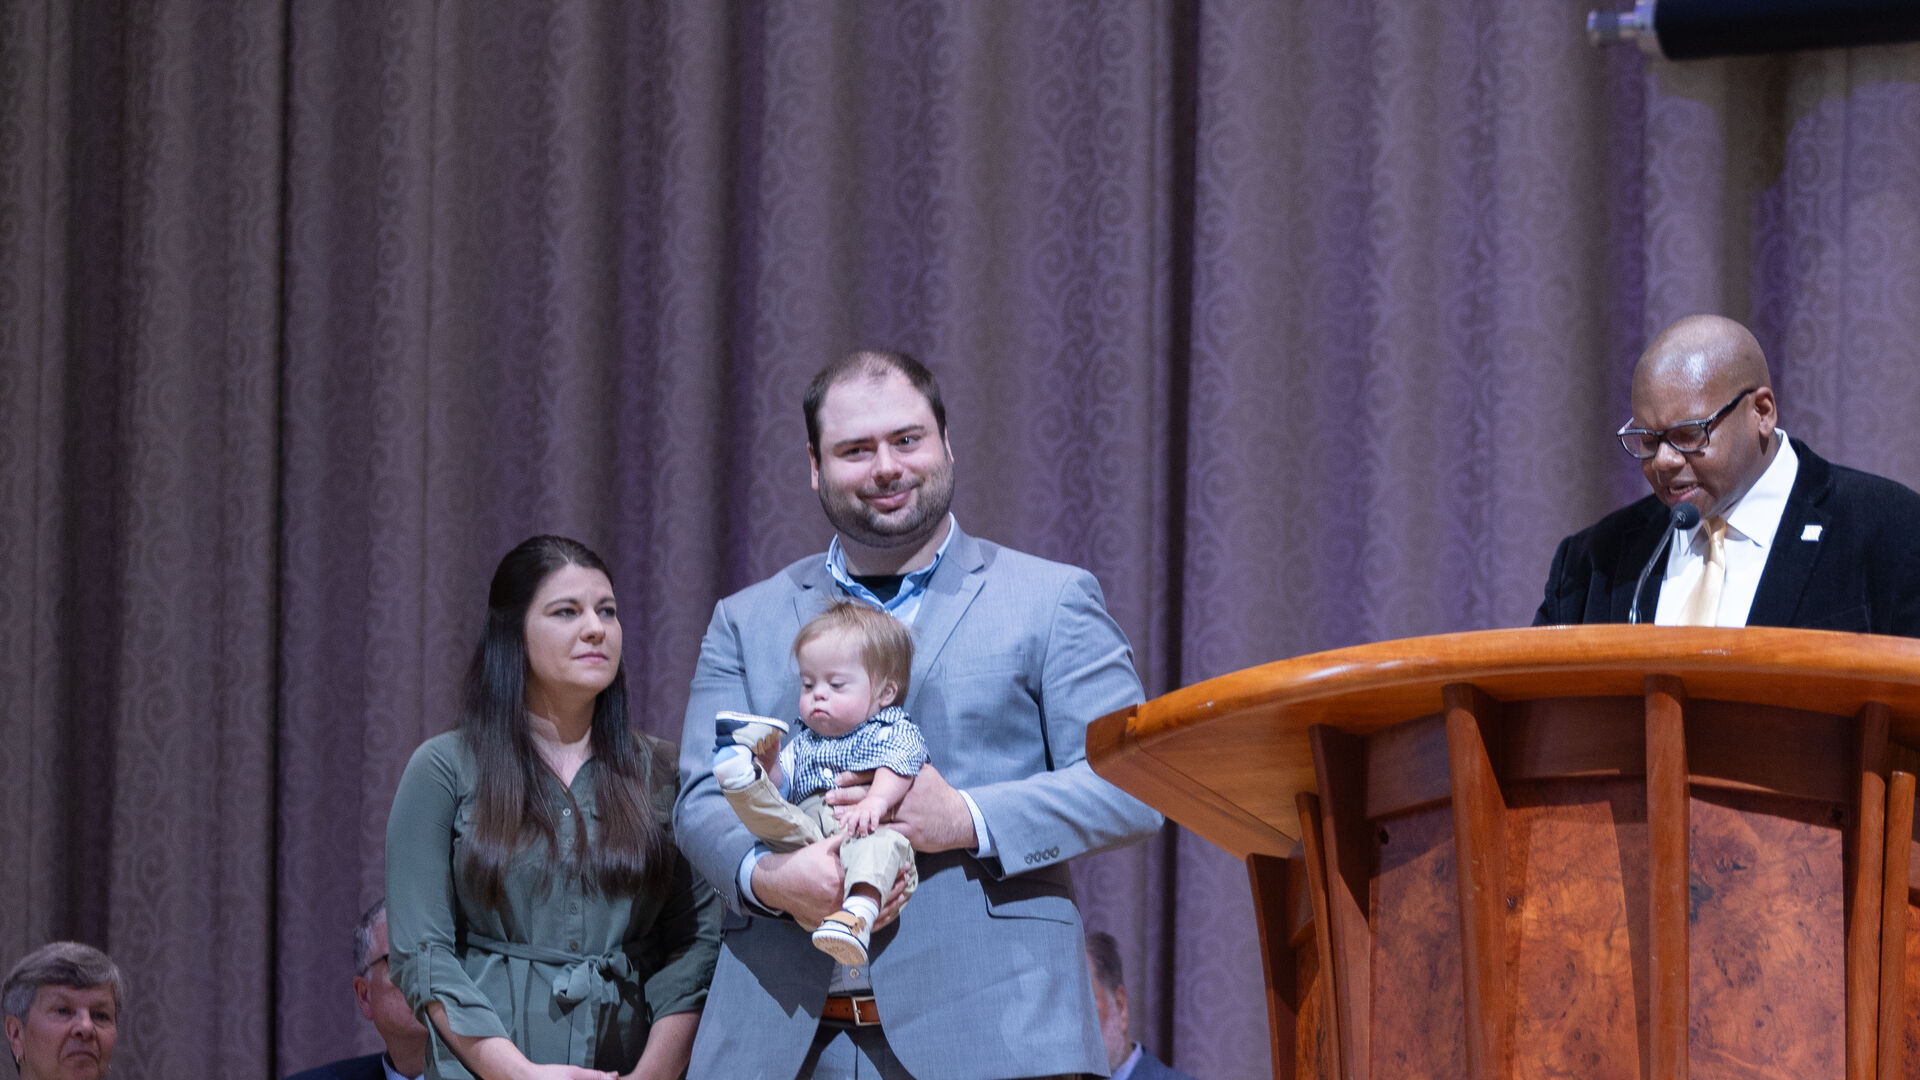 Houghton alumni Stephanie and David Bruno with their child standing as they are presented with an alumni award by President Lewis.